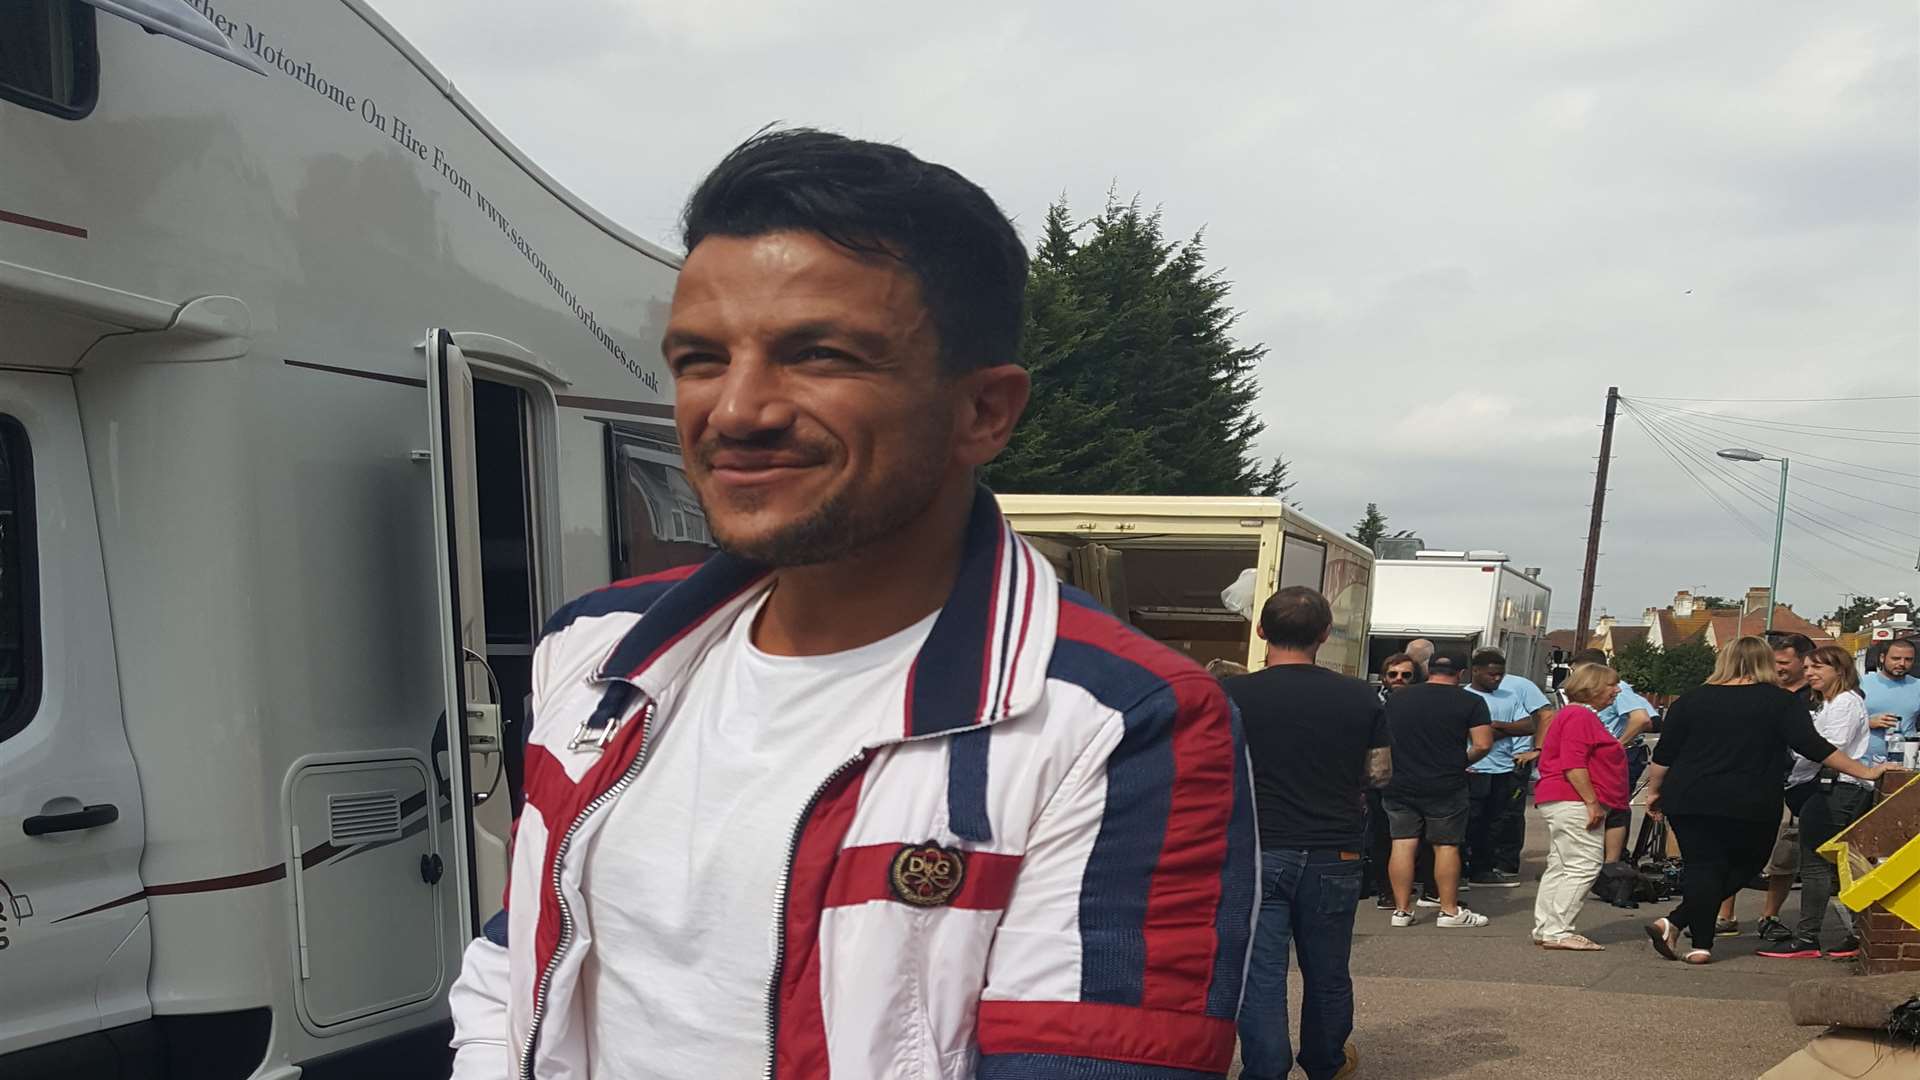 Peter Andre is on set filming in Gillingham